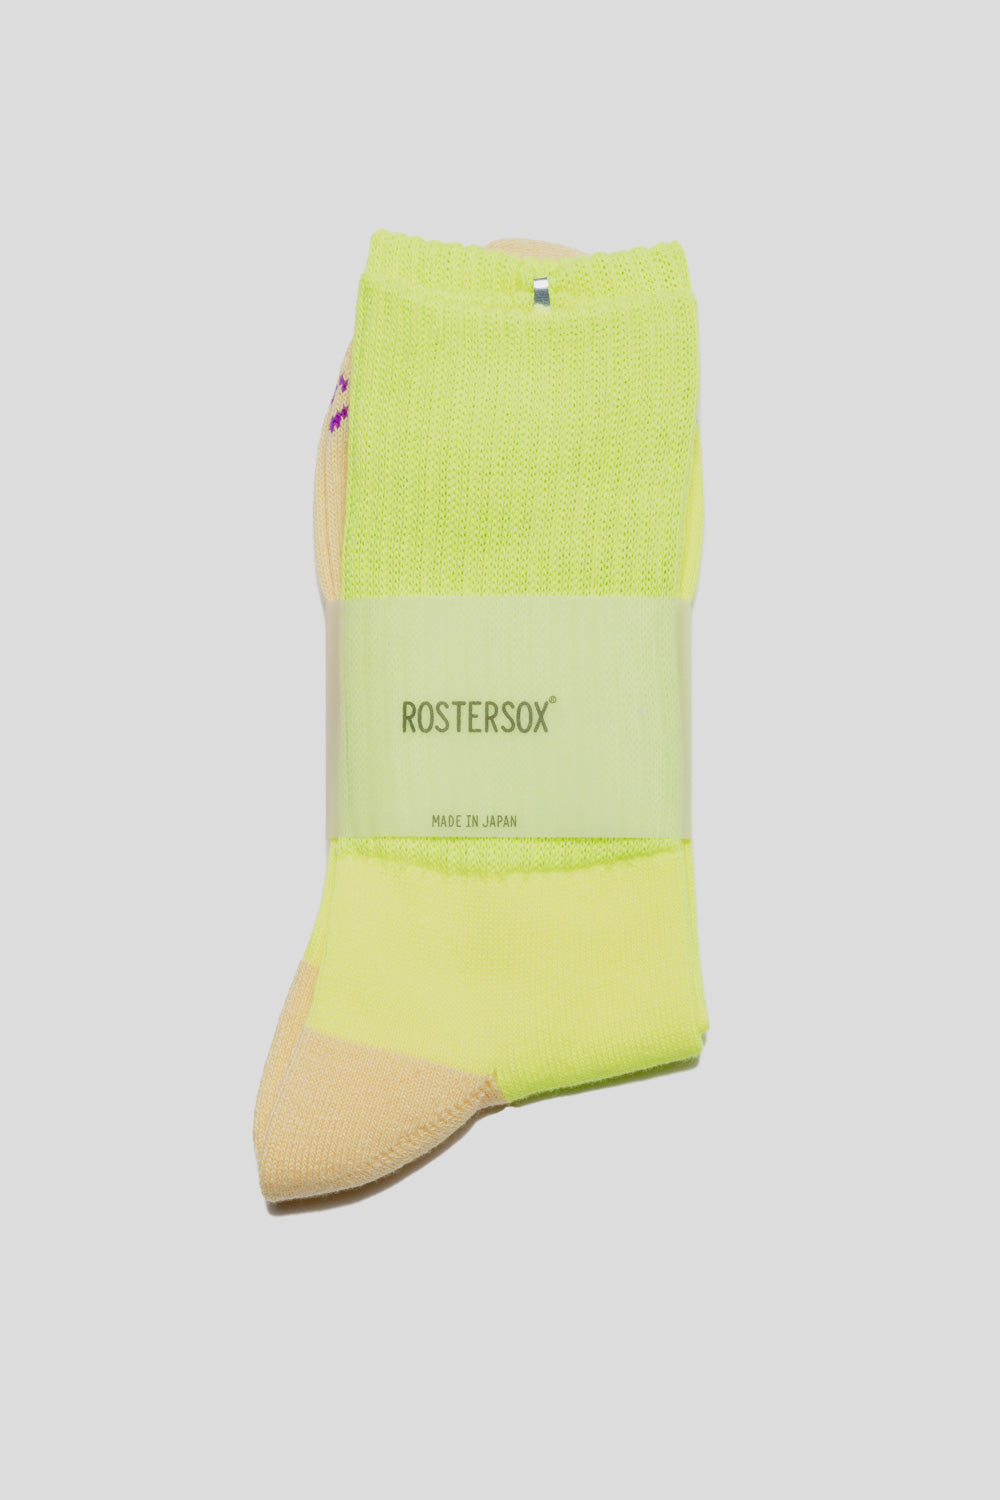 Rostersox Neo Socks in Yellow